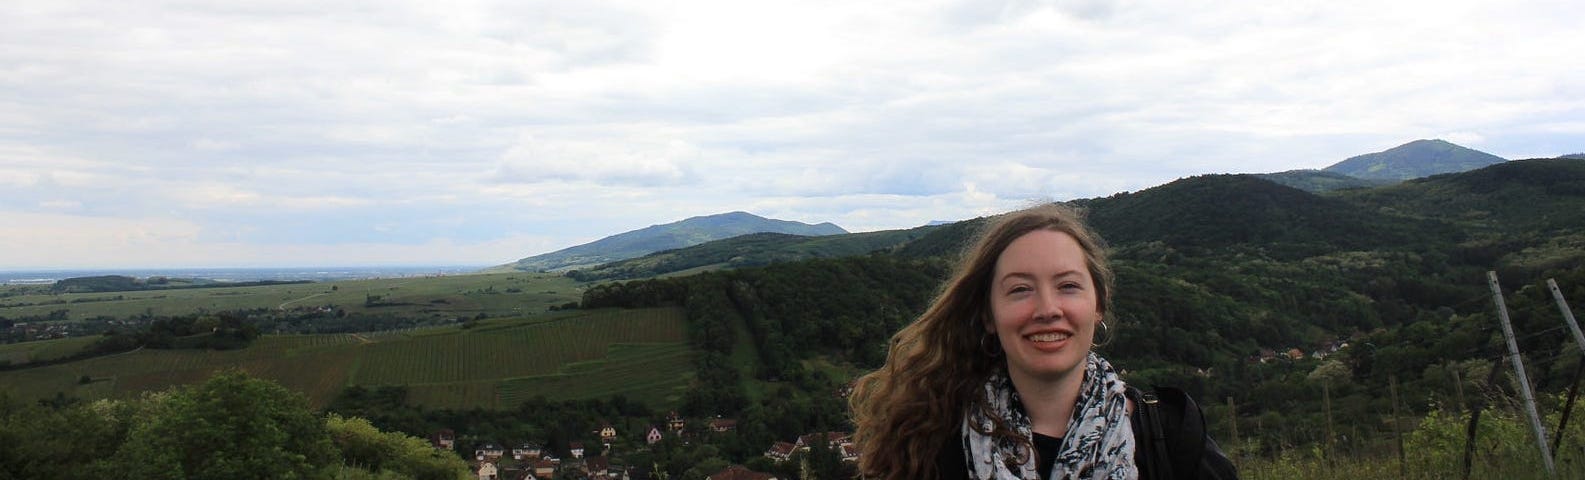 A tourist dressed in a wind jacket and floral scarf smiling in front of a backdrop of rolling hills, red-roofed houses and cloudy skies.